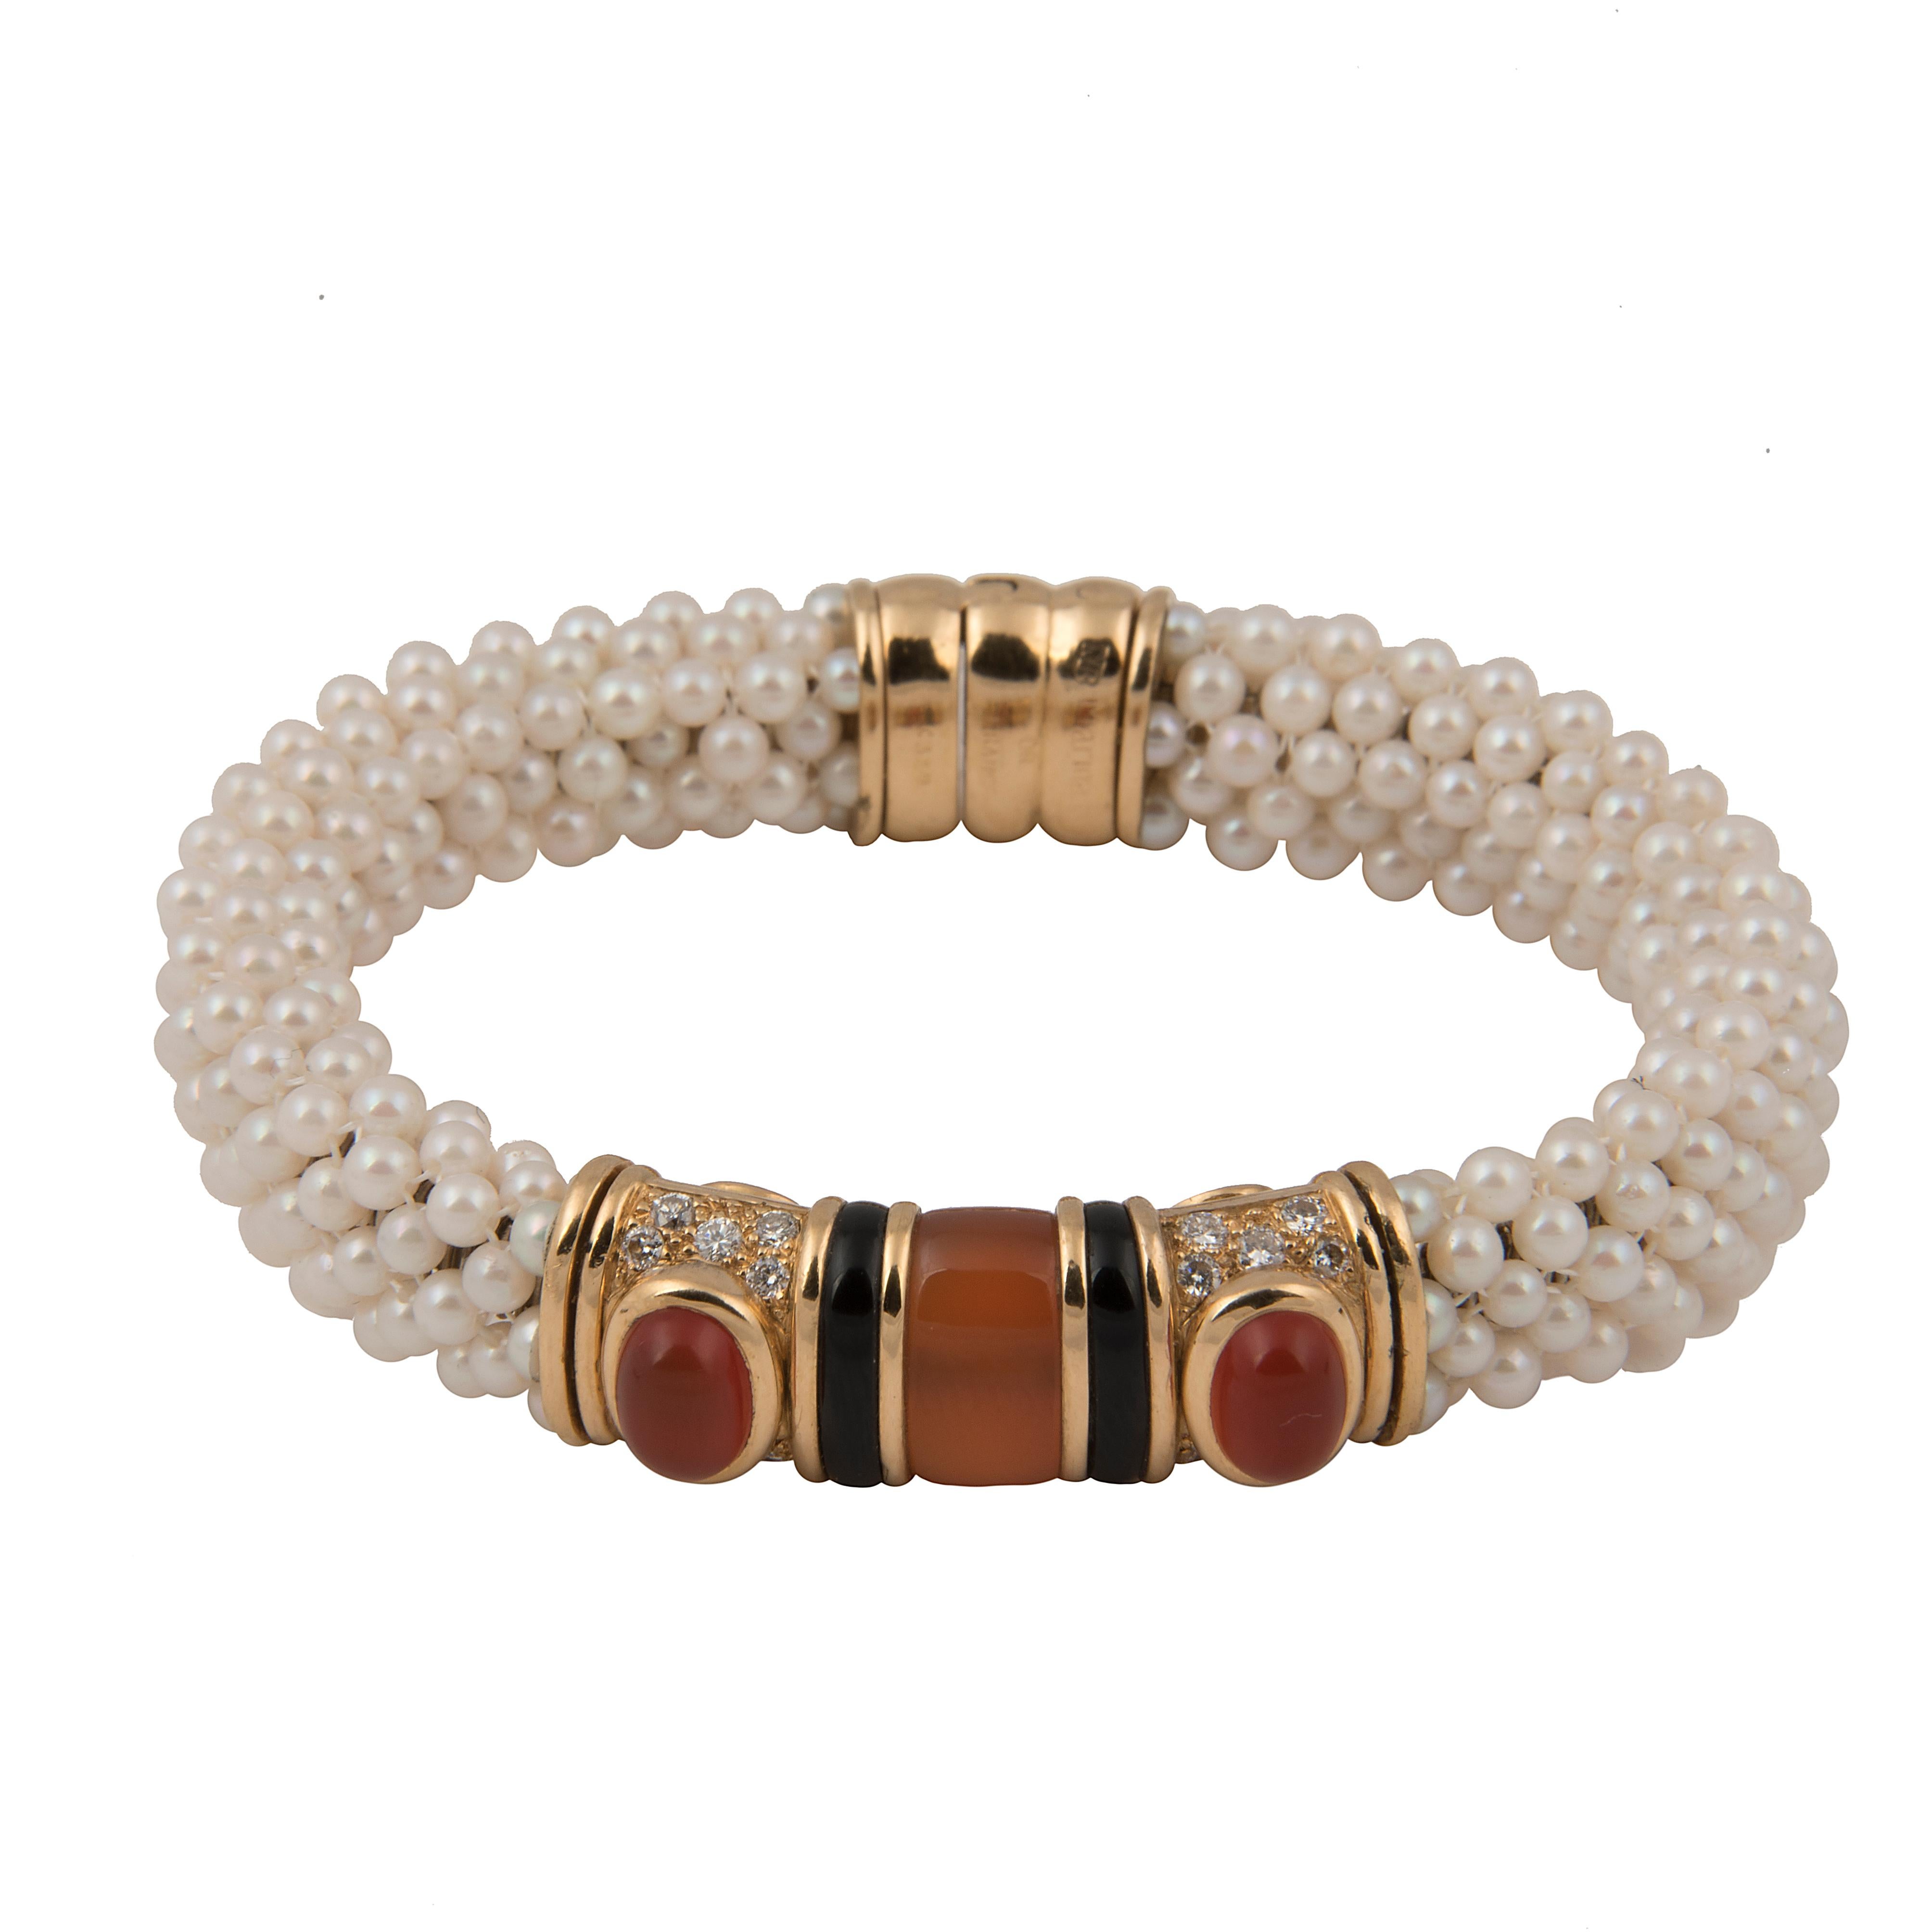 Bangle bracelet designed by Marina B (Bulgari). The band in braided cultured pearls on a stainless-steel spring, with an 18k yellow gold motif with onyx, pavé set diamonds and cornaline.
Signed Marina B, Maker's mark, French hallmarks and numbered